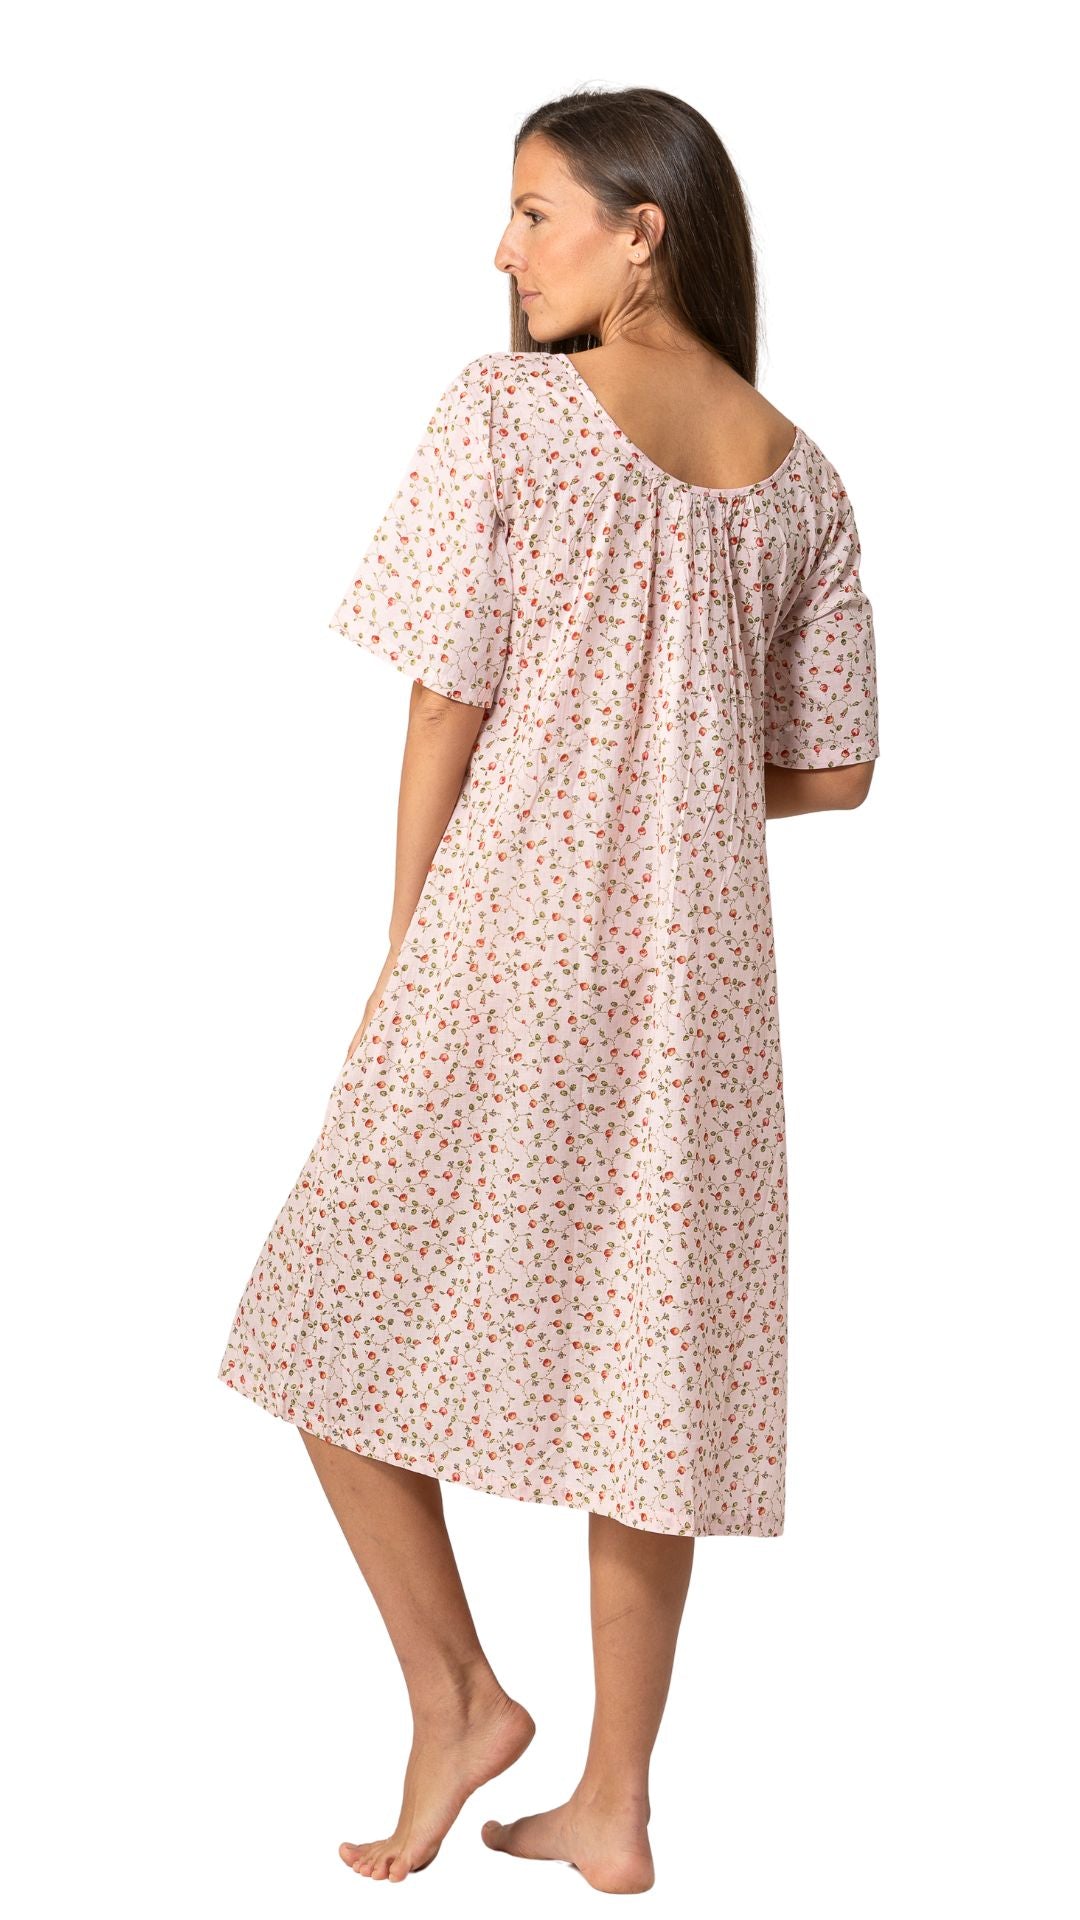 back image of pink light cotton night gown